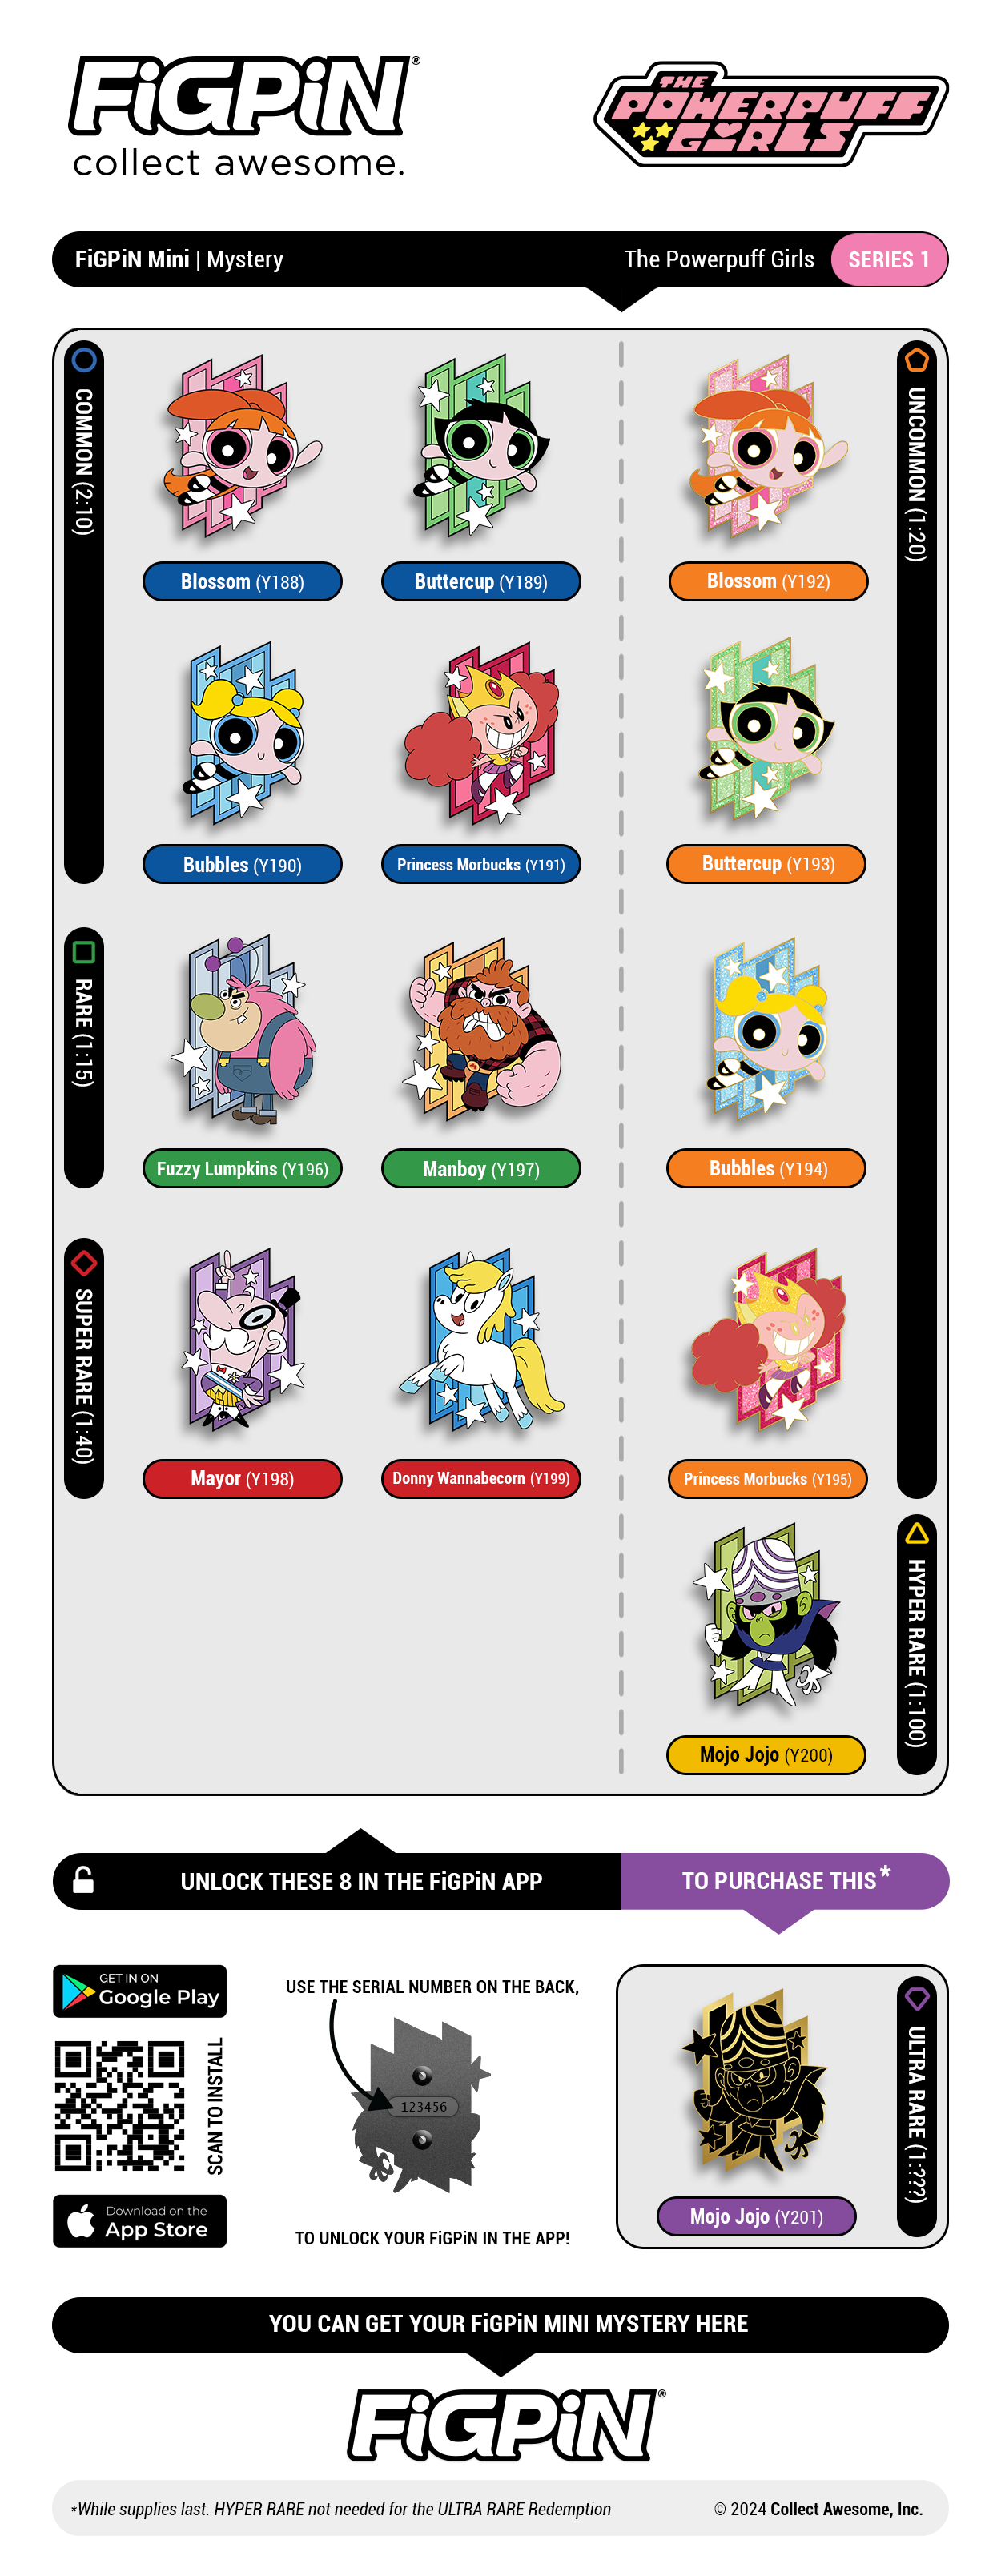 Rarity Sheet breaking down The Powerpuff Girls Mystery Minis collectibility. Sheet contains item numbers, rarities per character, and how to unlock on the FiGPiN APP